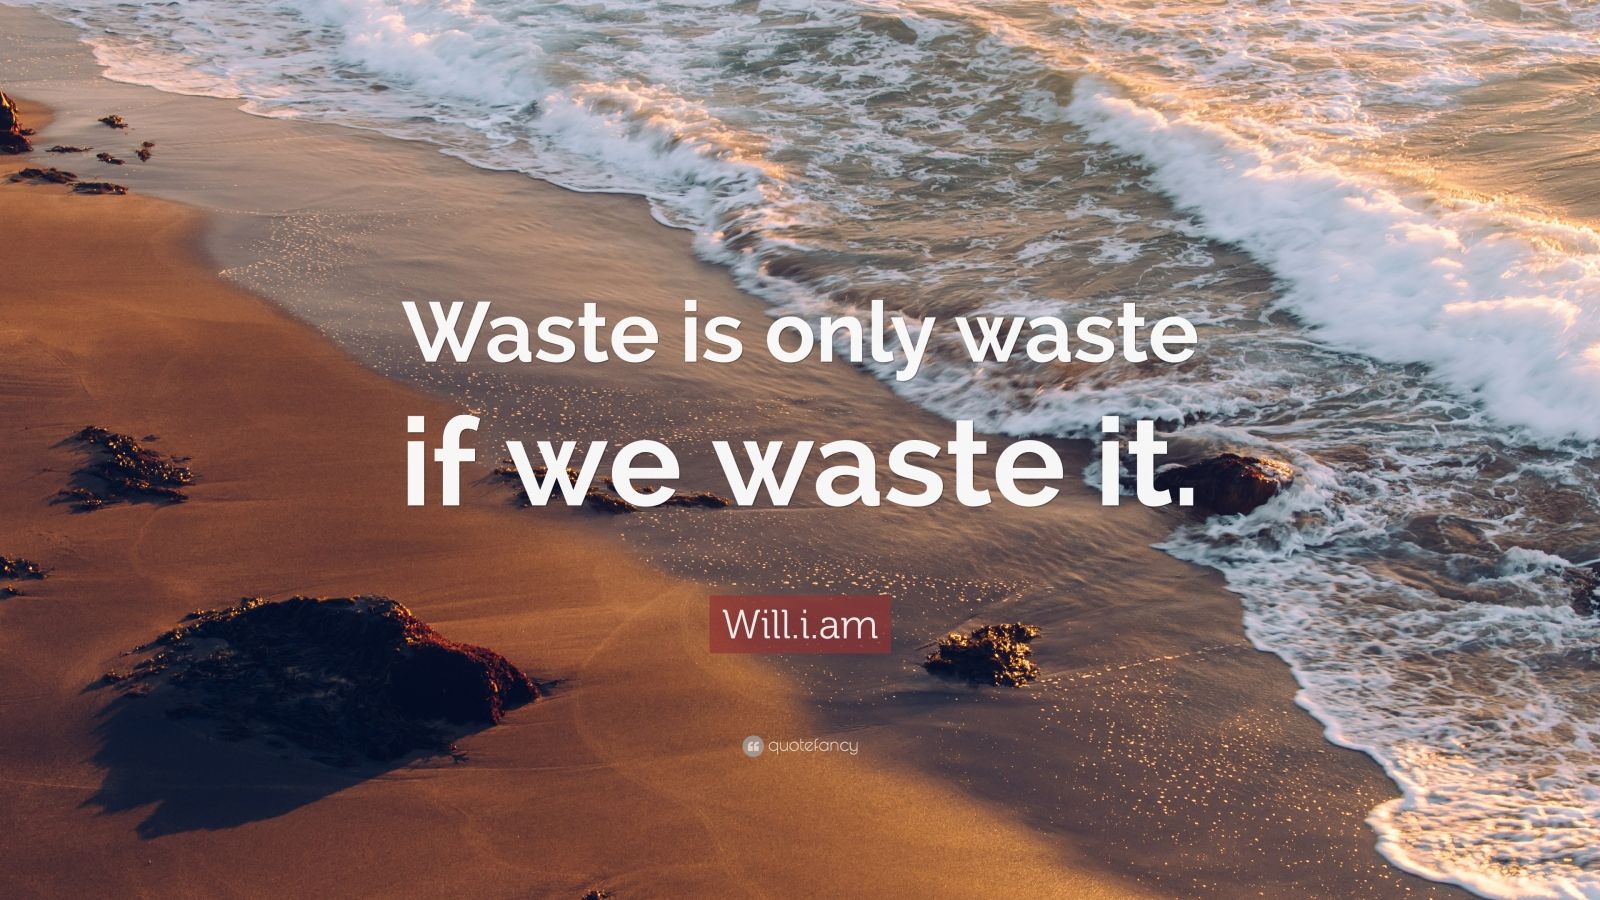 Will.i.am Quote: “Waste is only waste if we waste it.” (7 wallpapers ...